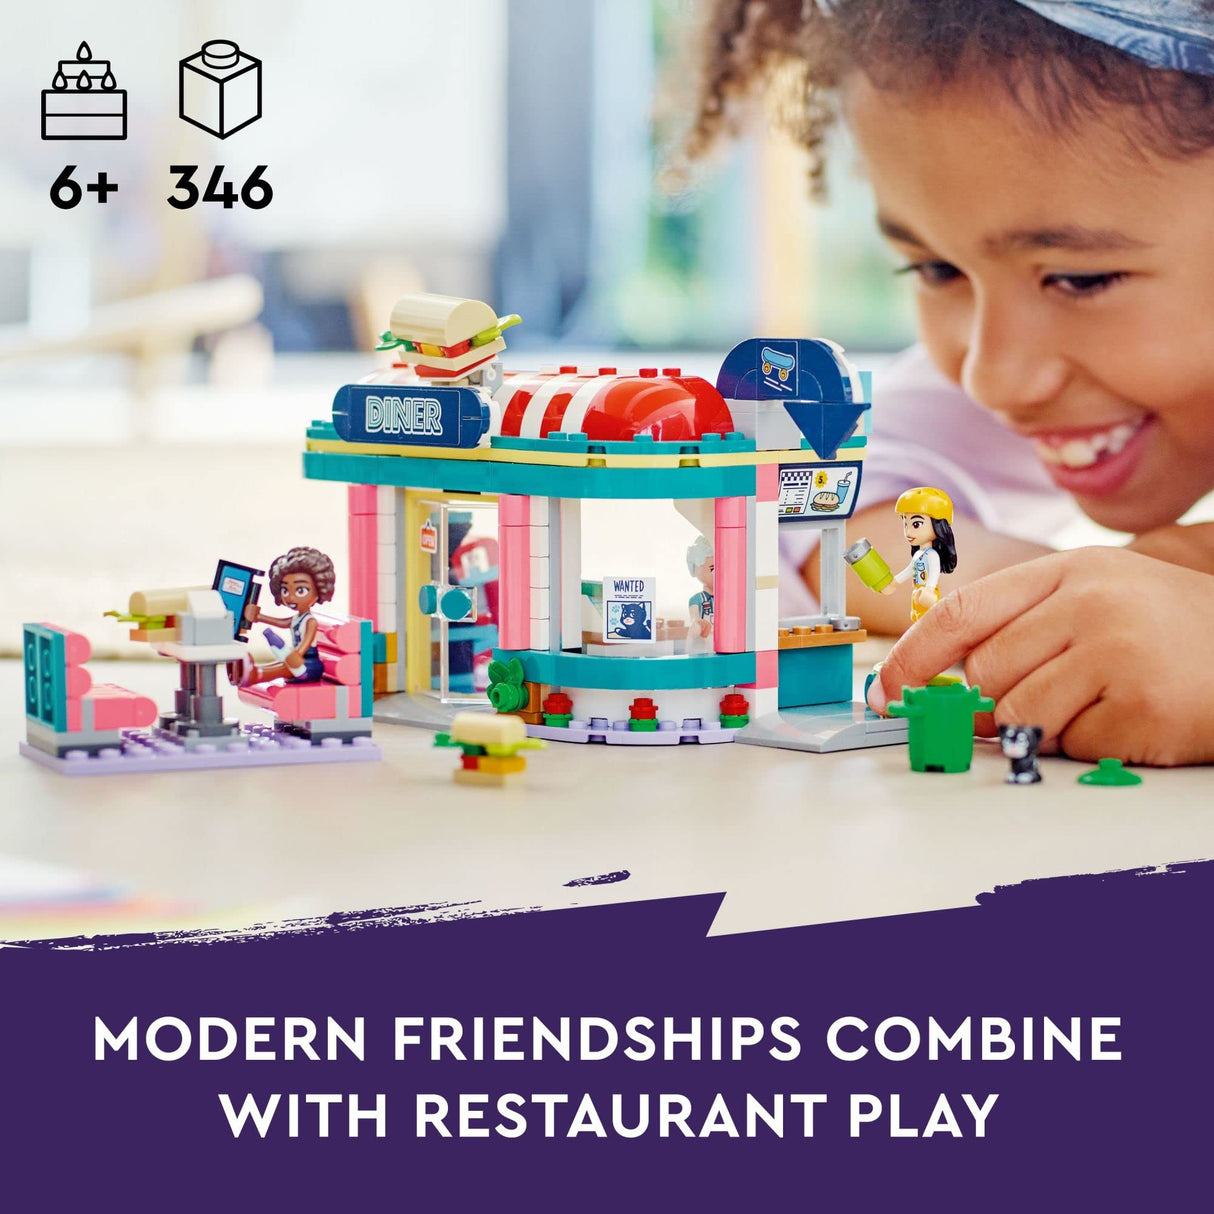 LEGO 41728 Friends Heartlake Serving Building Kit with 3 Mini Figures from 2023 Series Toy for Children Over 6 Years, Gift Idea for Birthdays